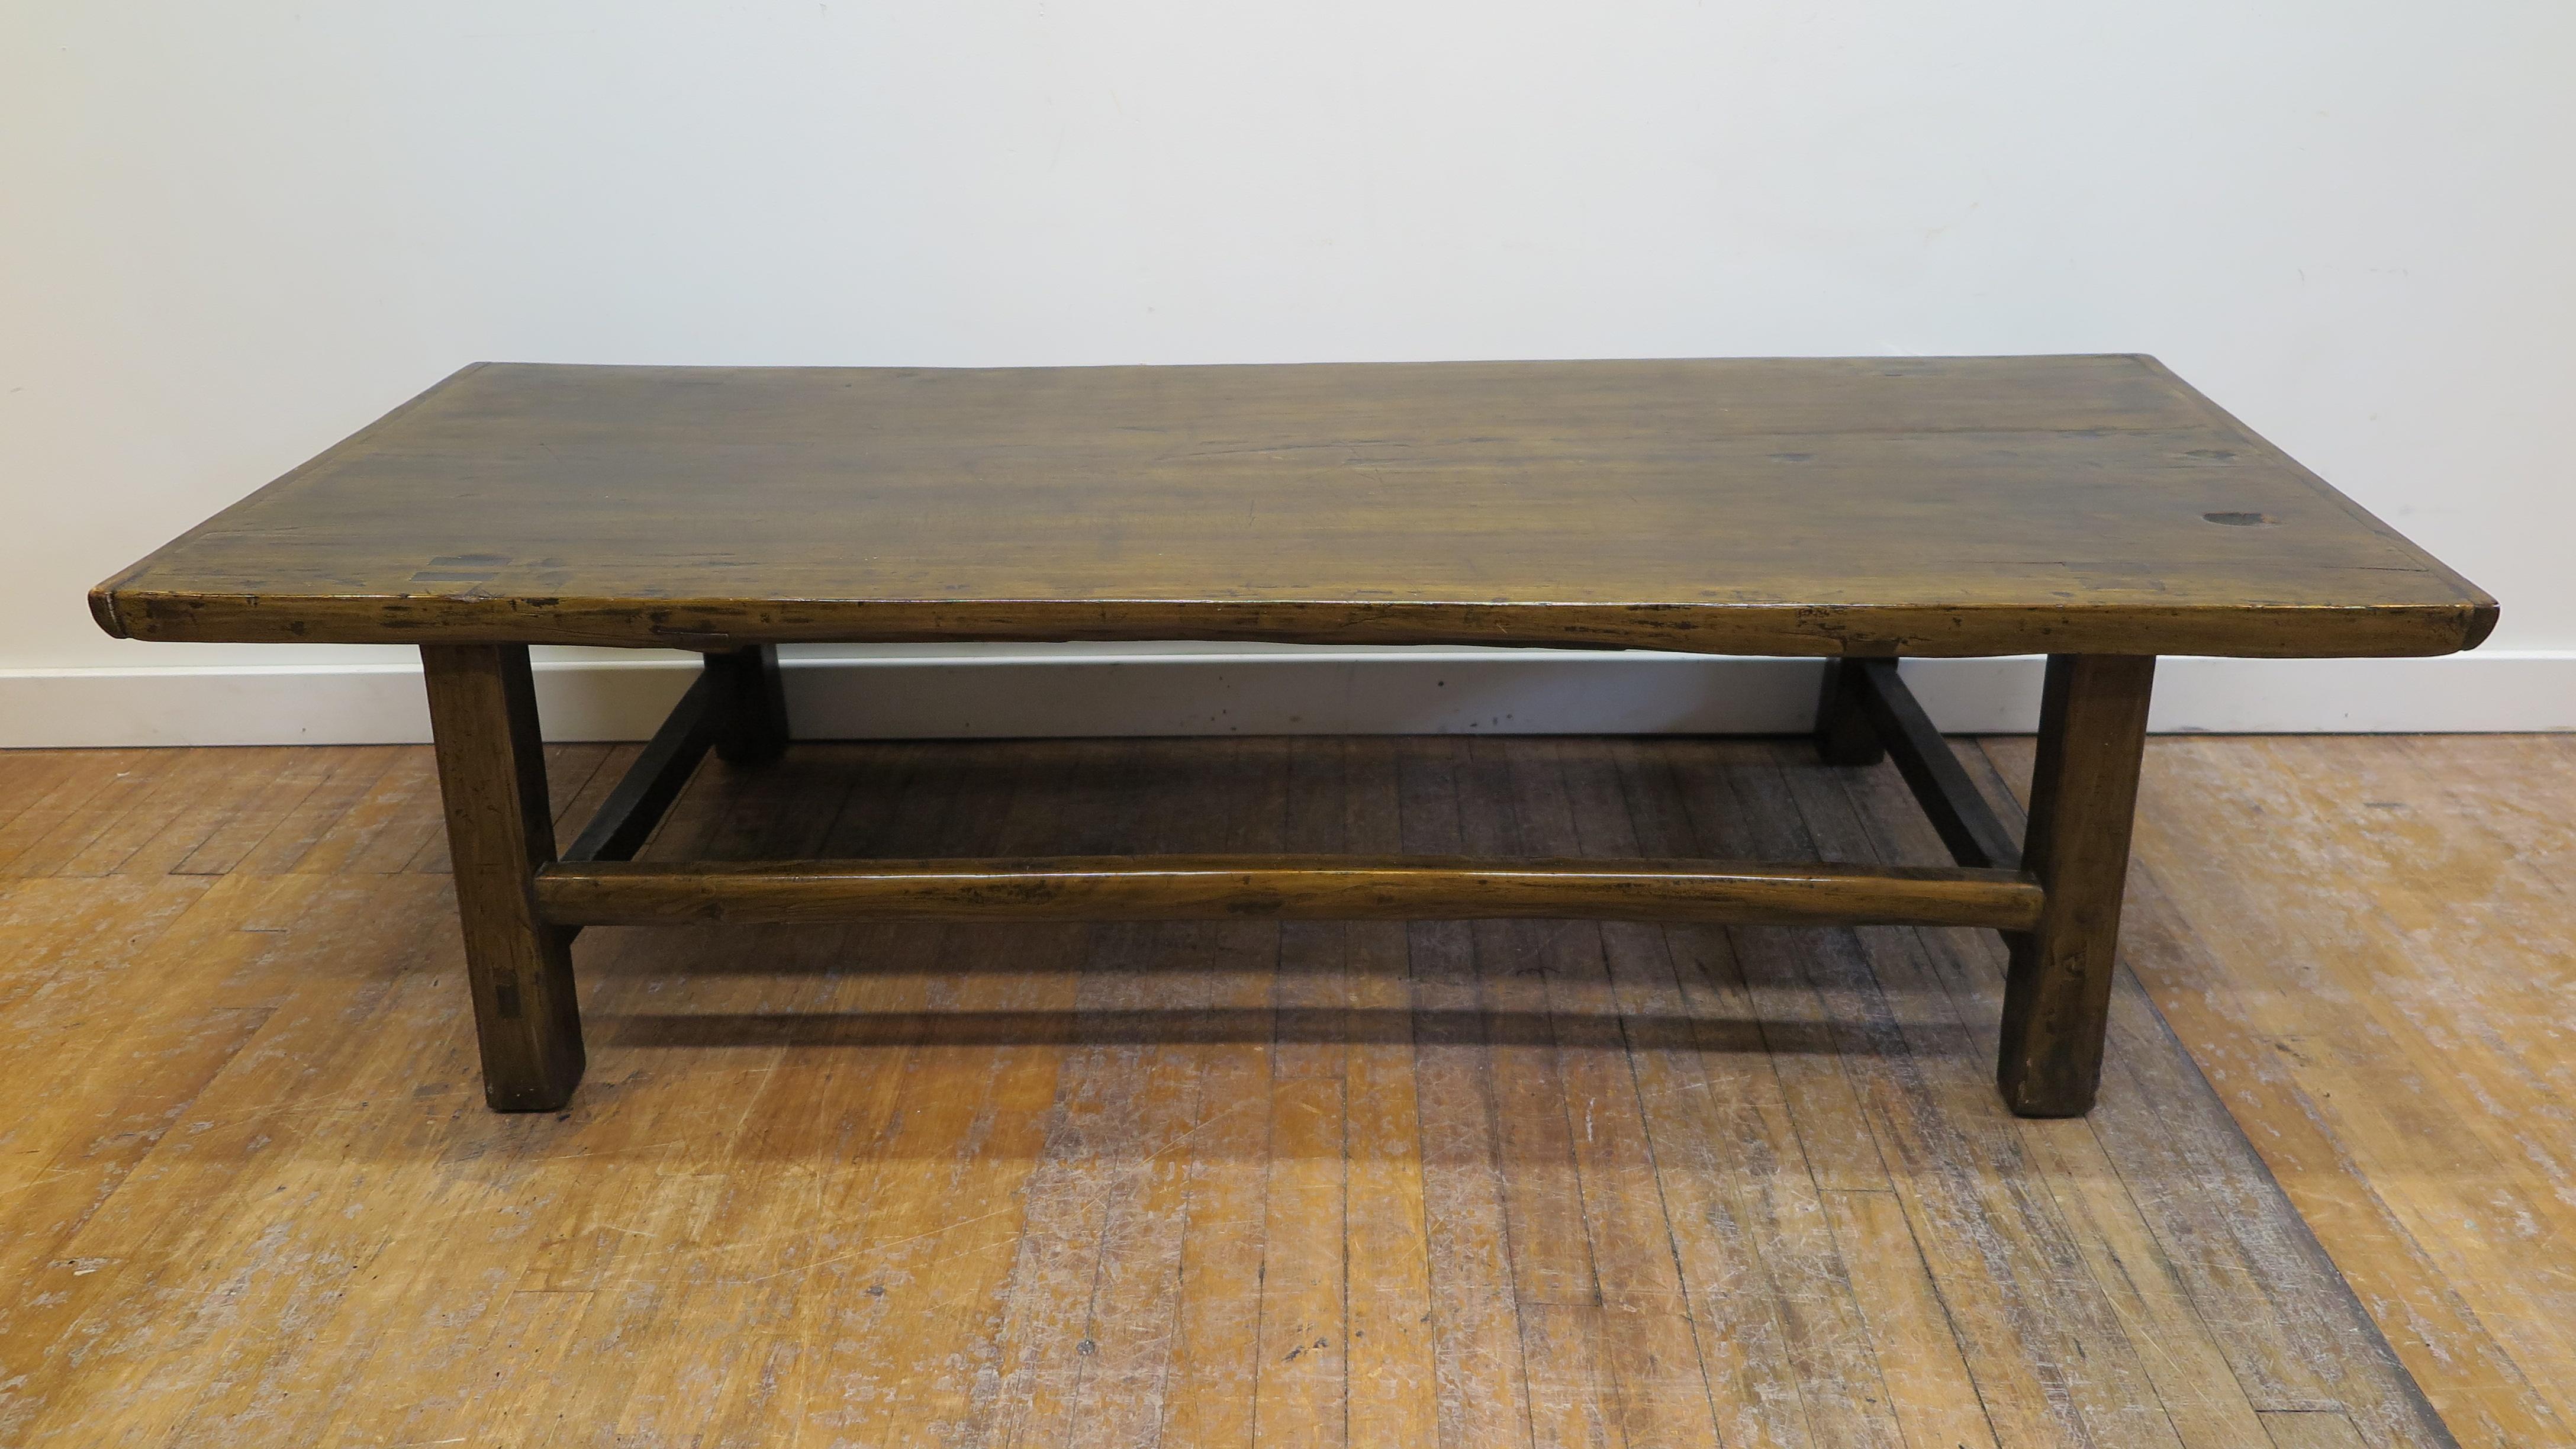 Early 20th century country coffee cocktail table. This antique country low table with splayed legs and tenon mortise construction of Poplar wood makes a great coffee or cocktail table. The table has a lacquer finish that captures the age worn patina